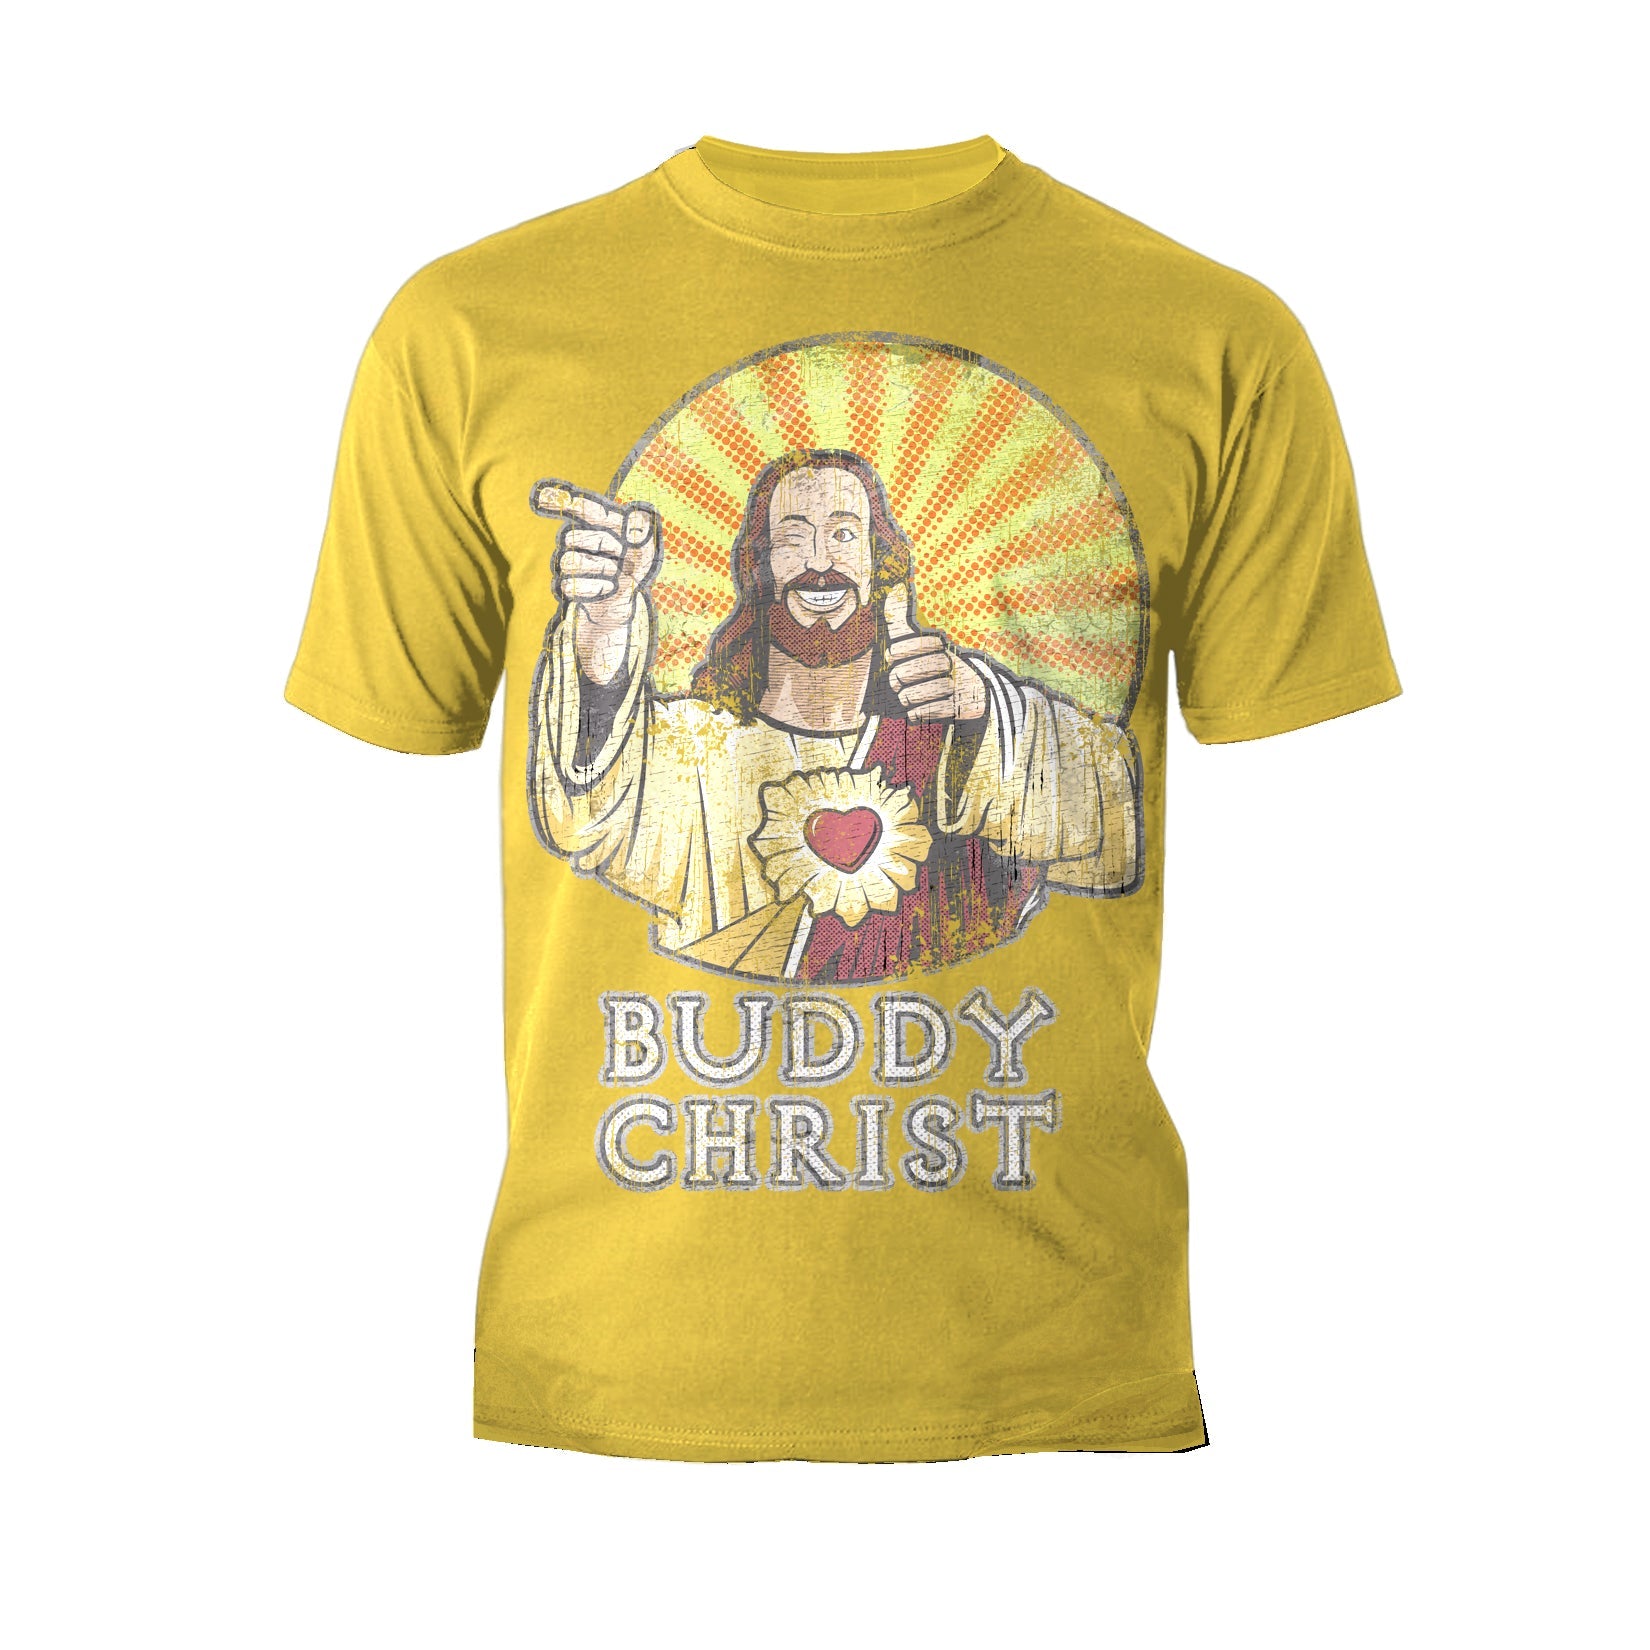 Kevin Smith View Askewniverse Buddy Christ Got Summer Vintage Variant Official Men's T-Shirt